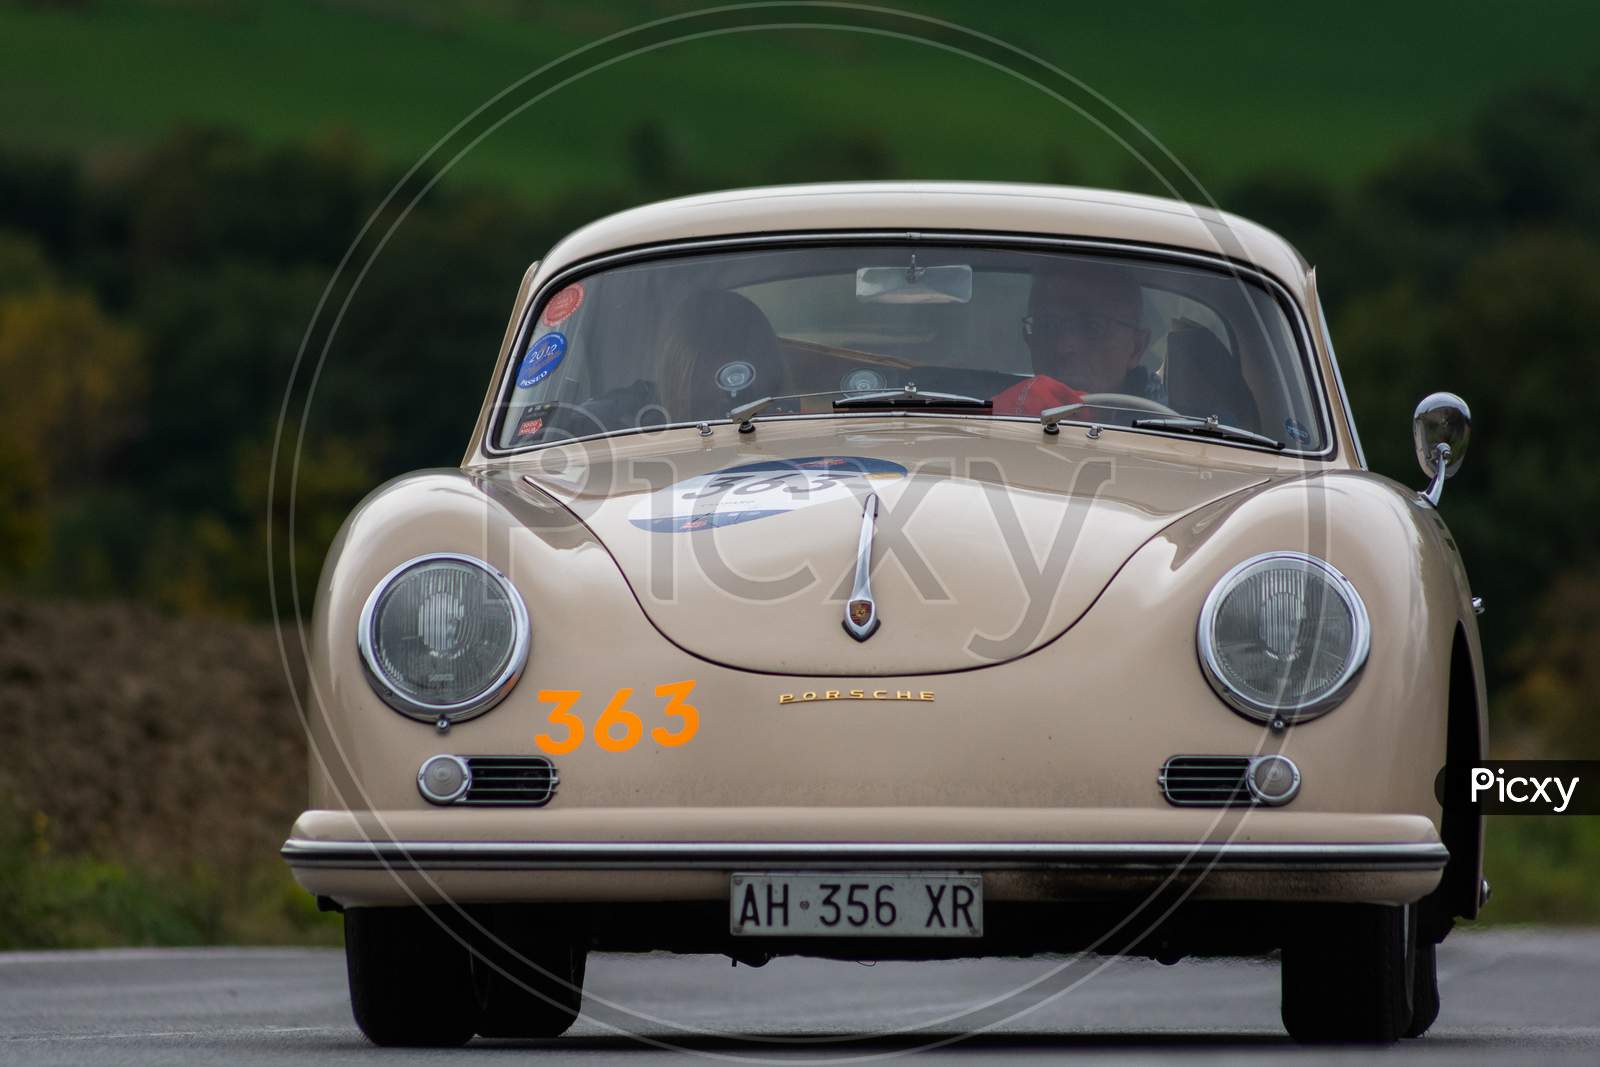 Porsche 356 A 1600 Coupé 1956 On An Old Racing Car In Rally Mille Miglia 2020 The Famous Italian Historical Race (1927-1957)